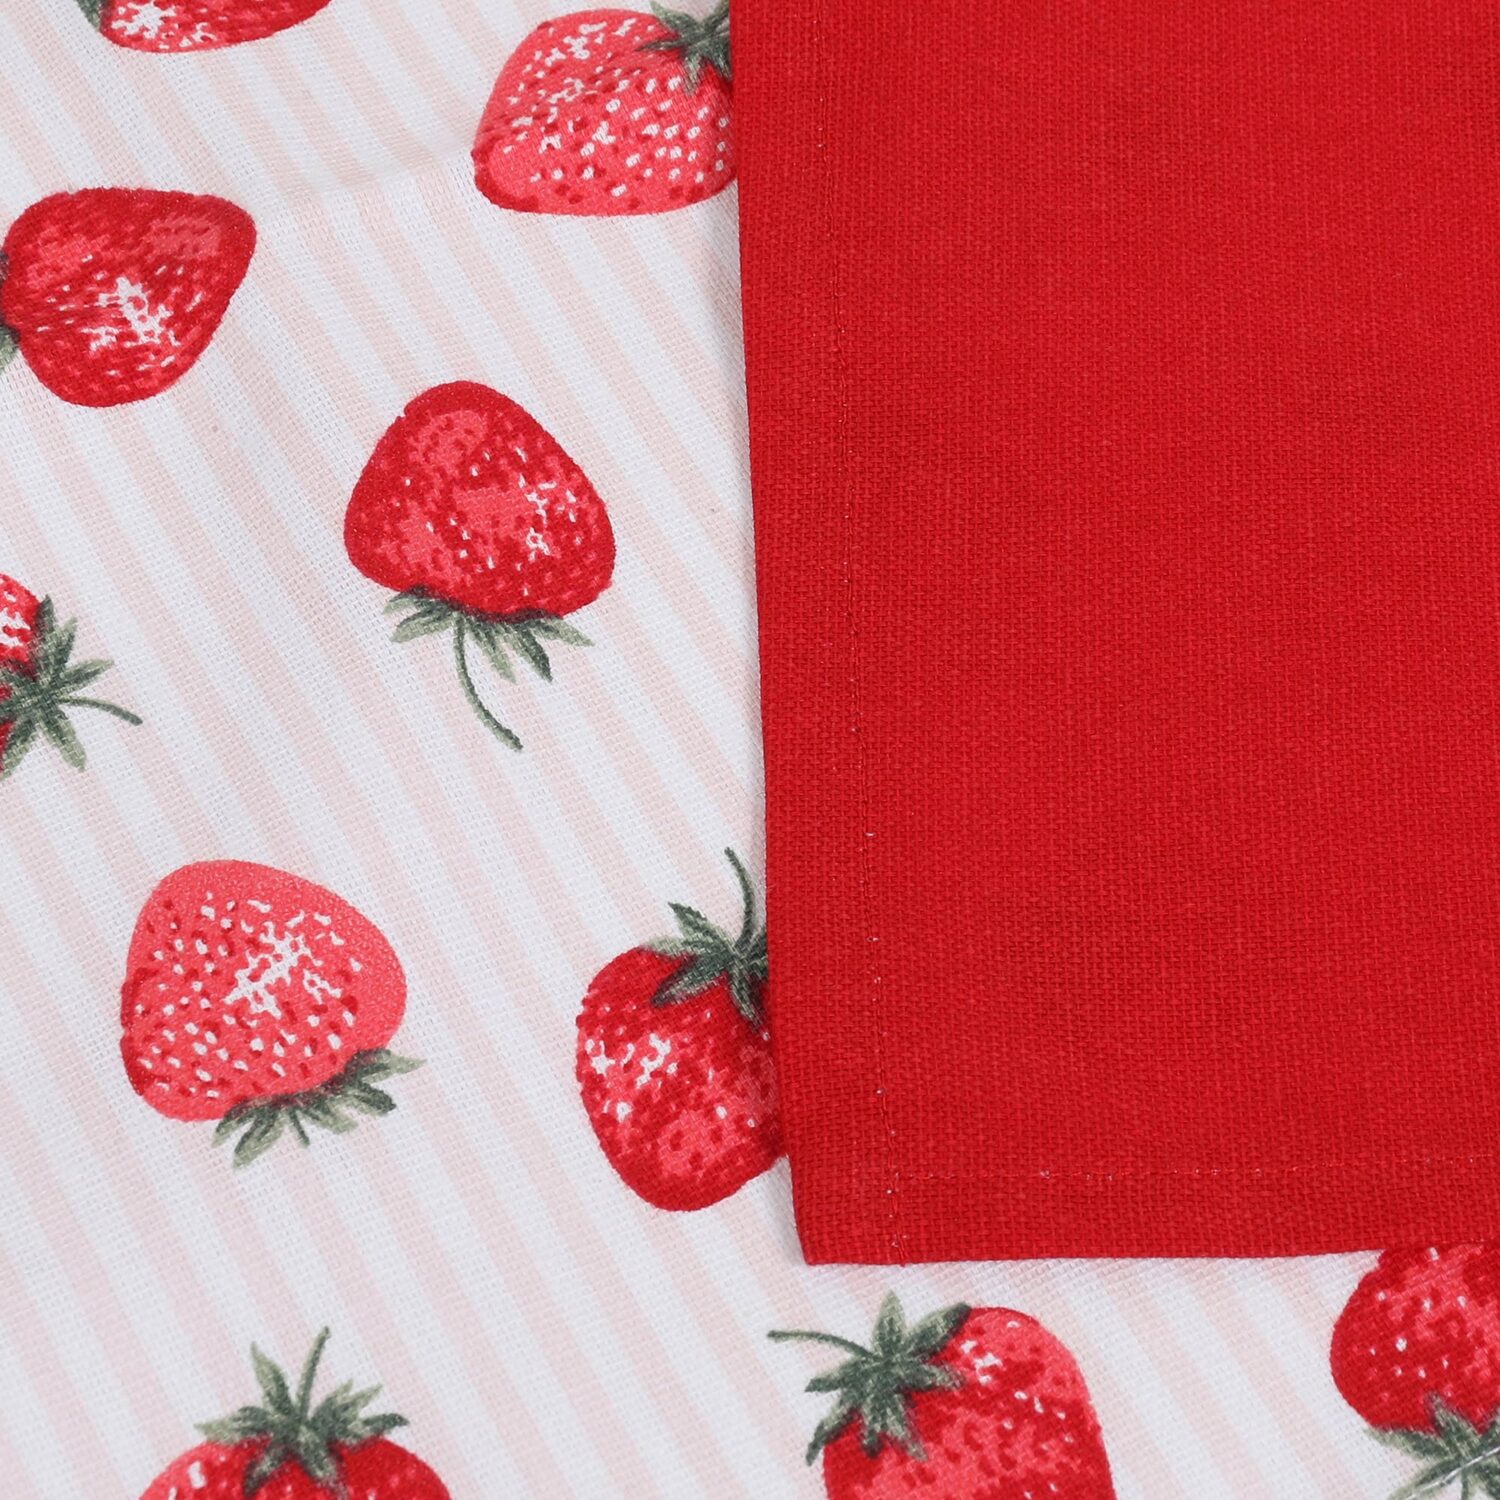 Pack of 2 Strawberry Napkins - Red Image 3